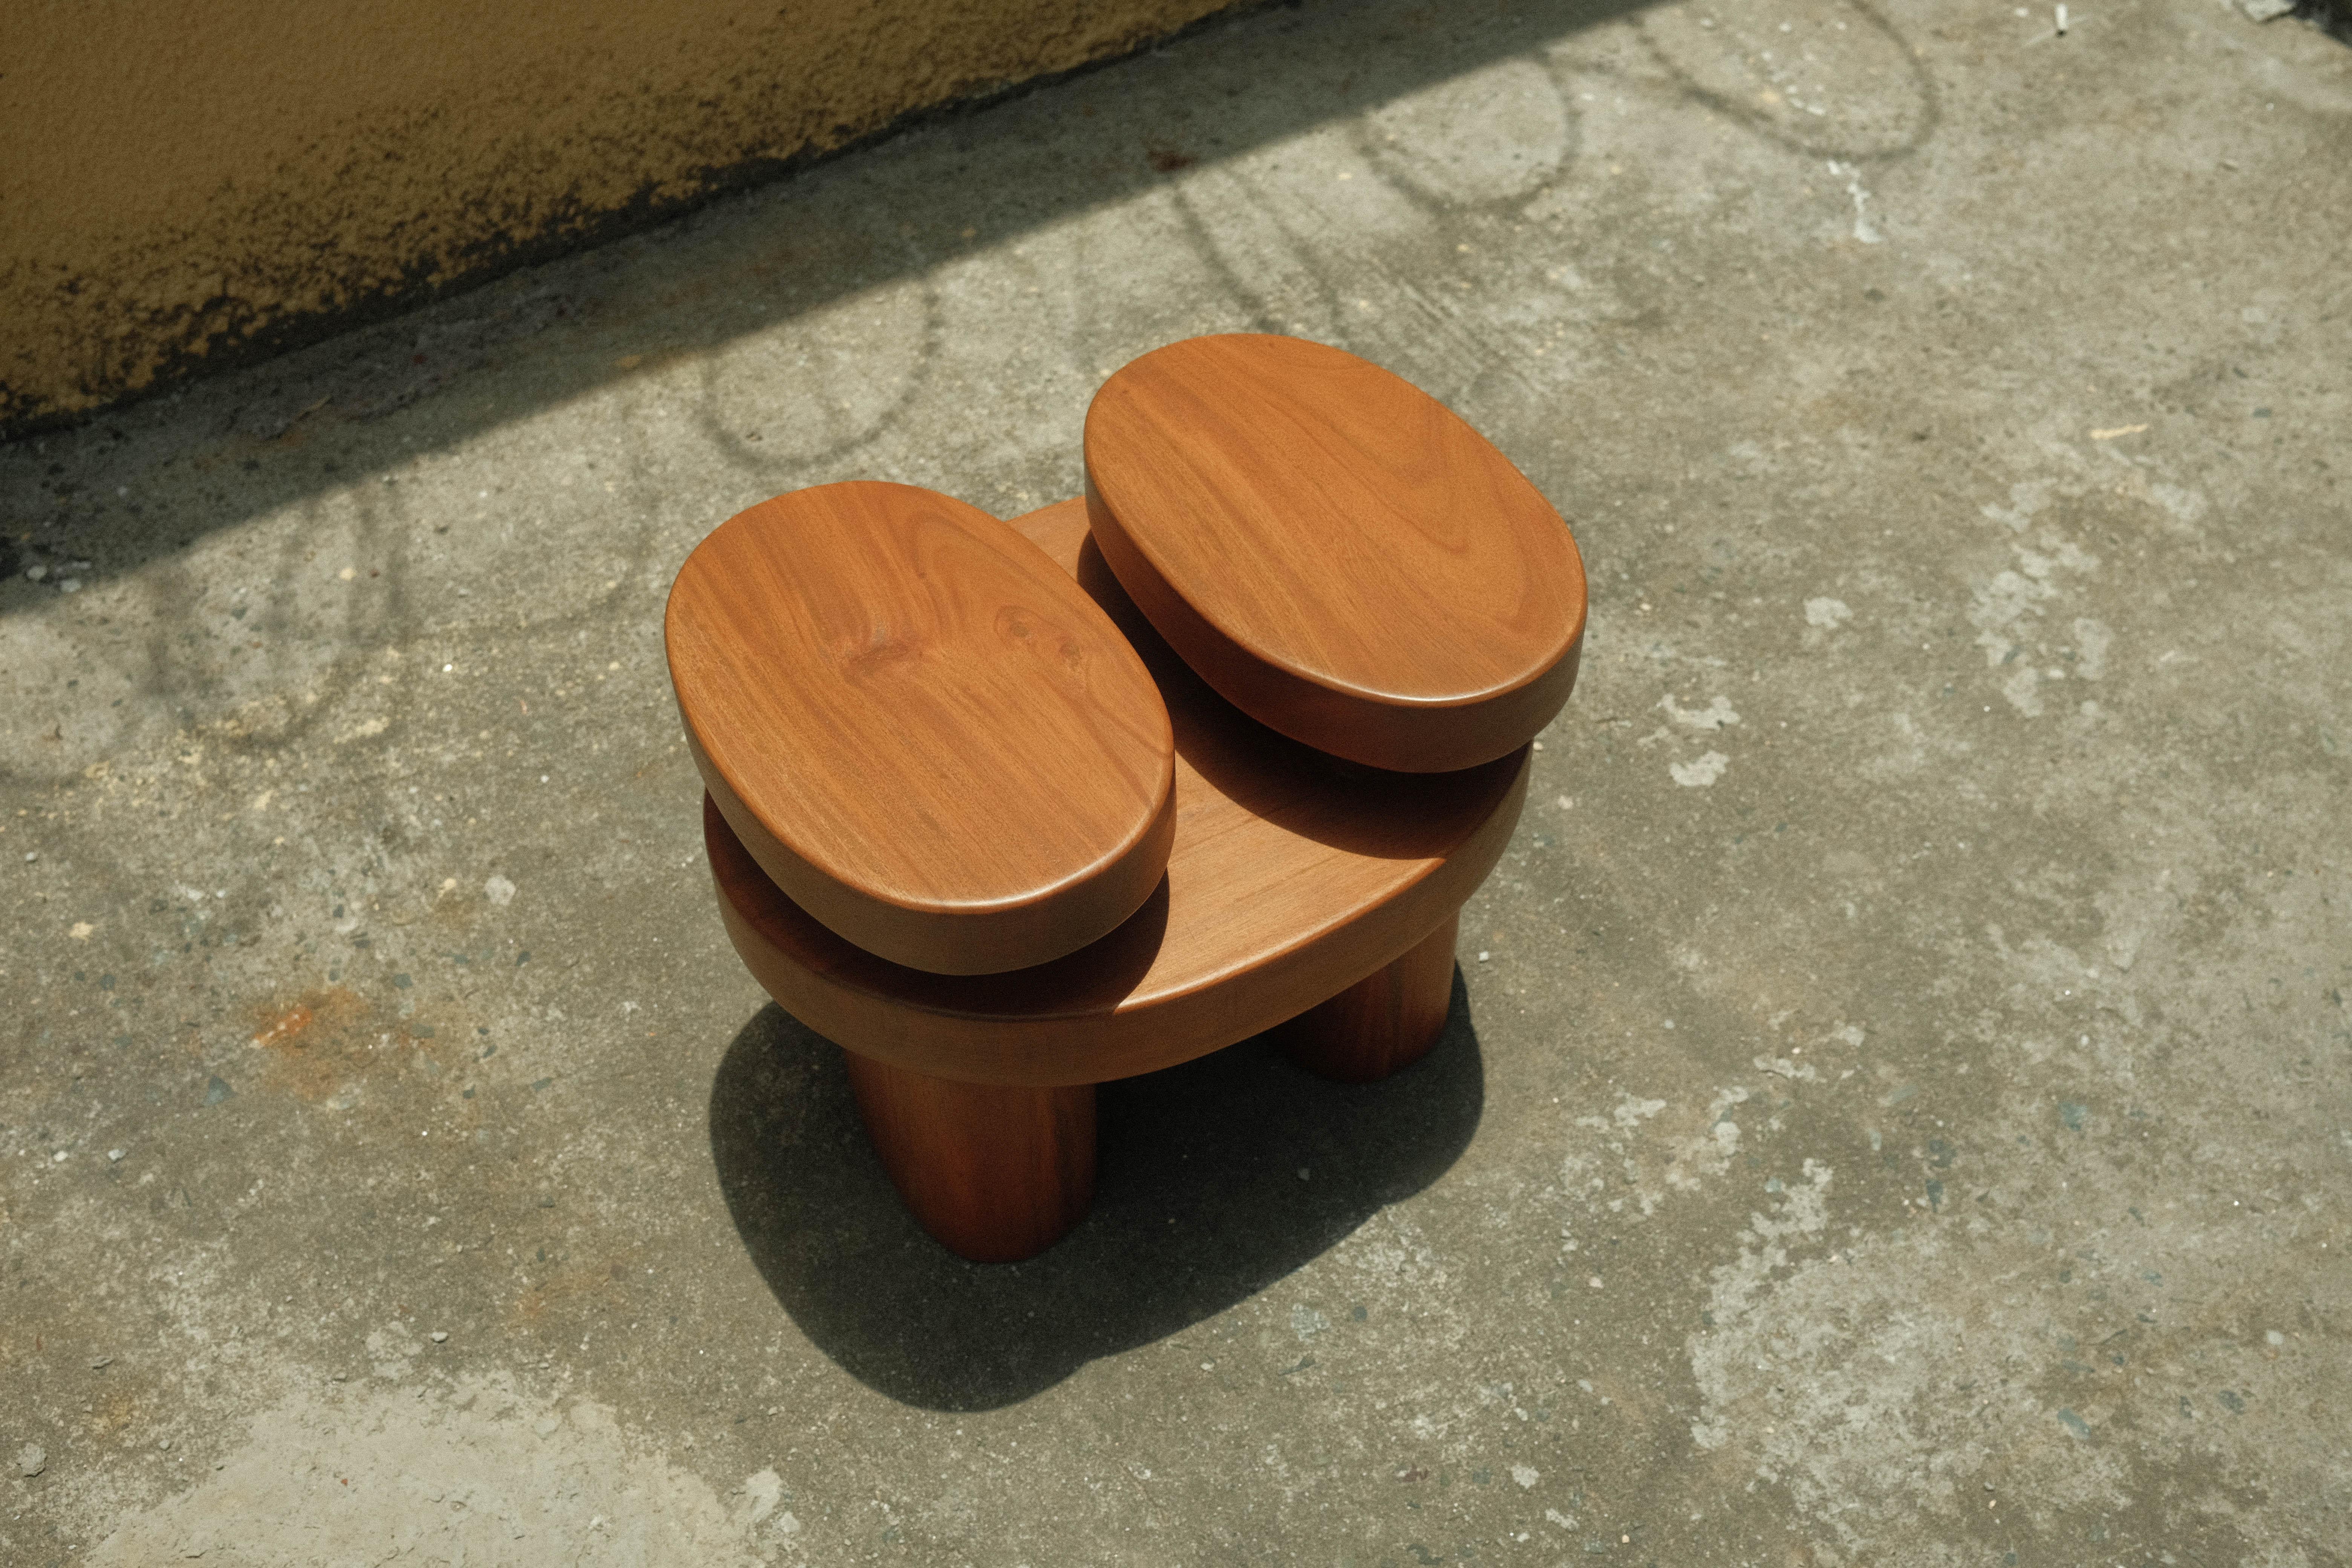 Multifunctional and sleek, with hand crafted details, the Footstool-01 make the perfect accent pieces for your home. Stylish, yet adaptable and perfect for small living spaces, each piece is crafted from solid hardwood and can be used as a stool or